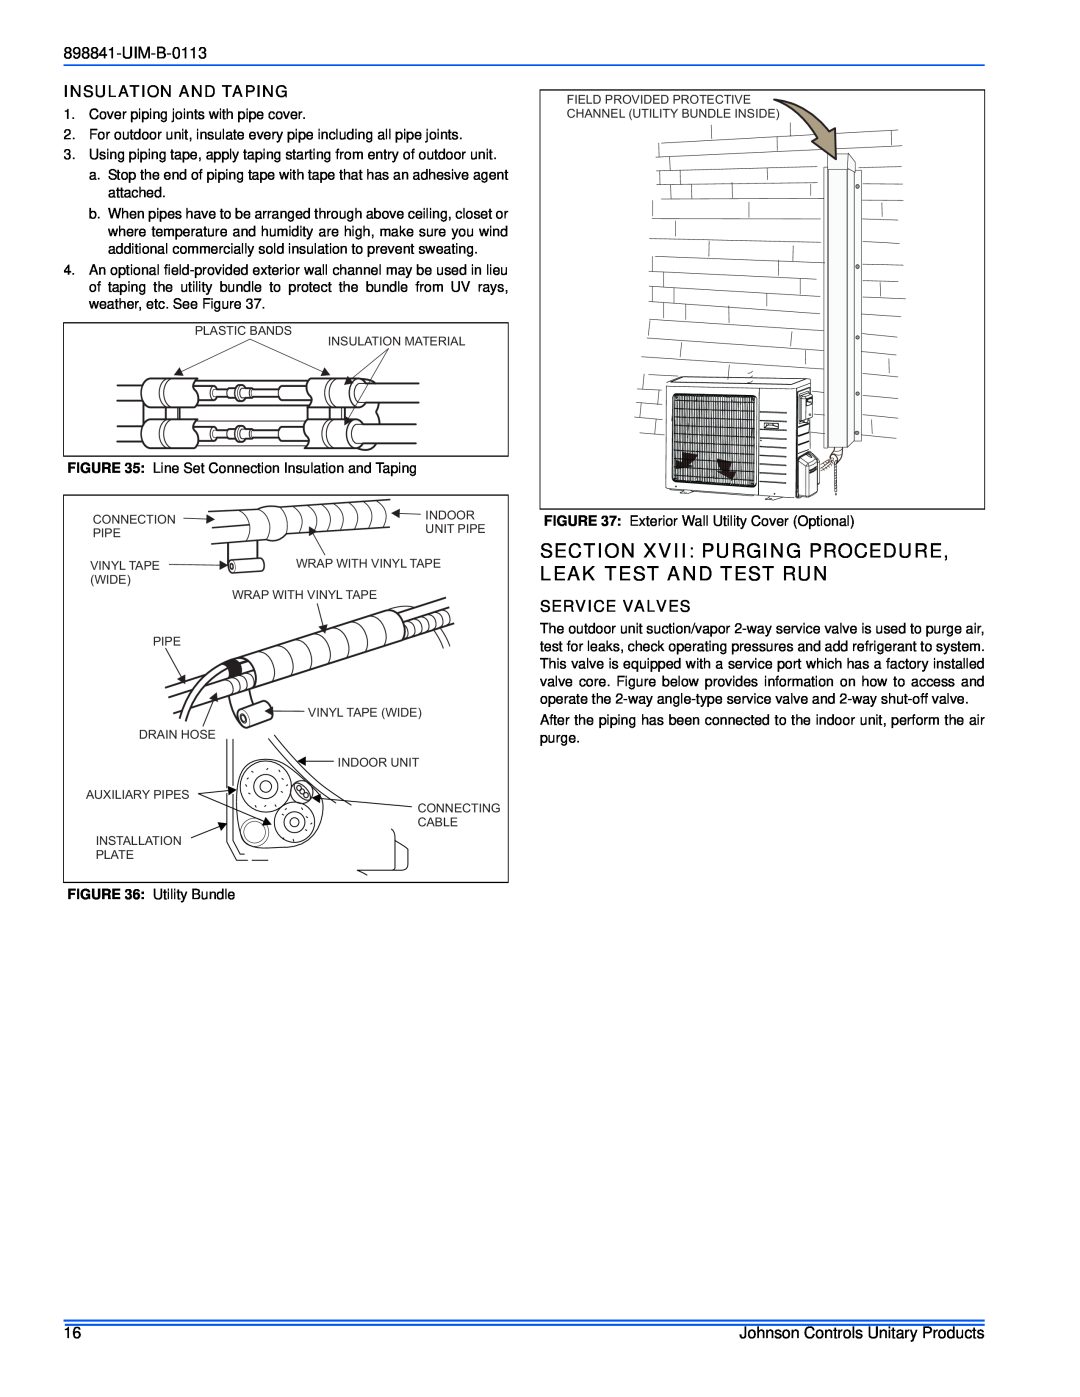 Johnson Controls 22 SEER installation manual Insulation And Taping, Service Valves, UIM-B-0113 